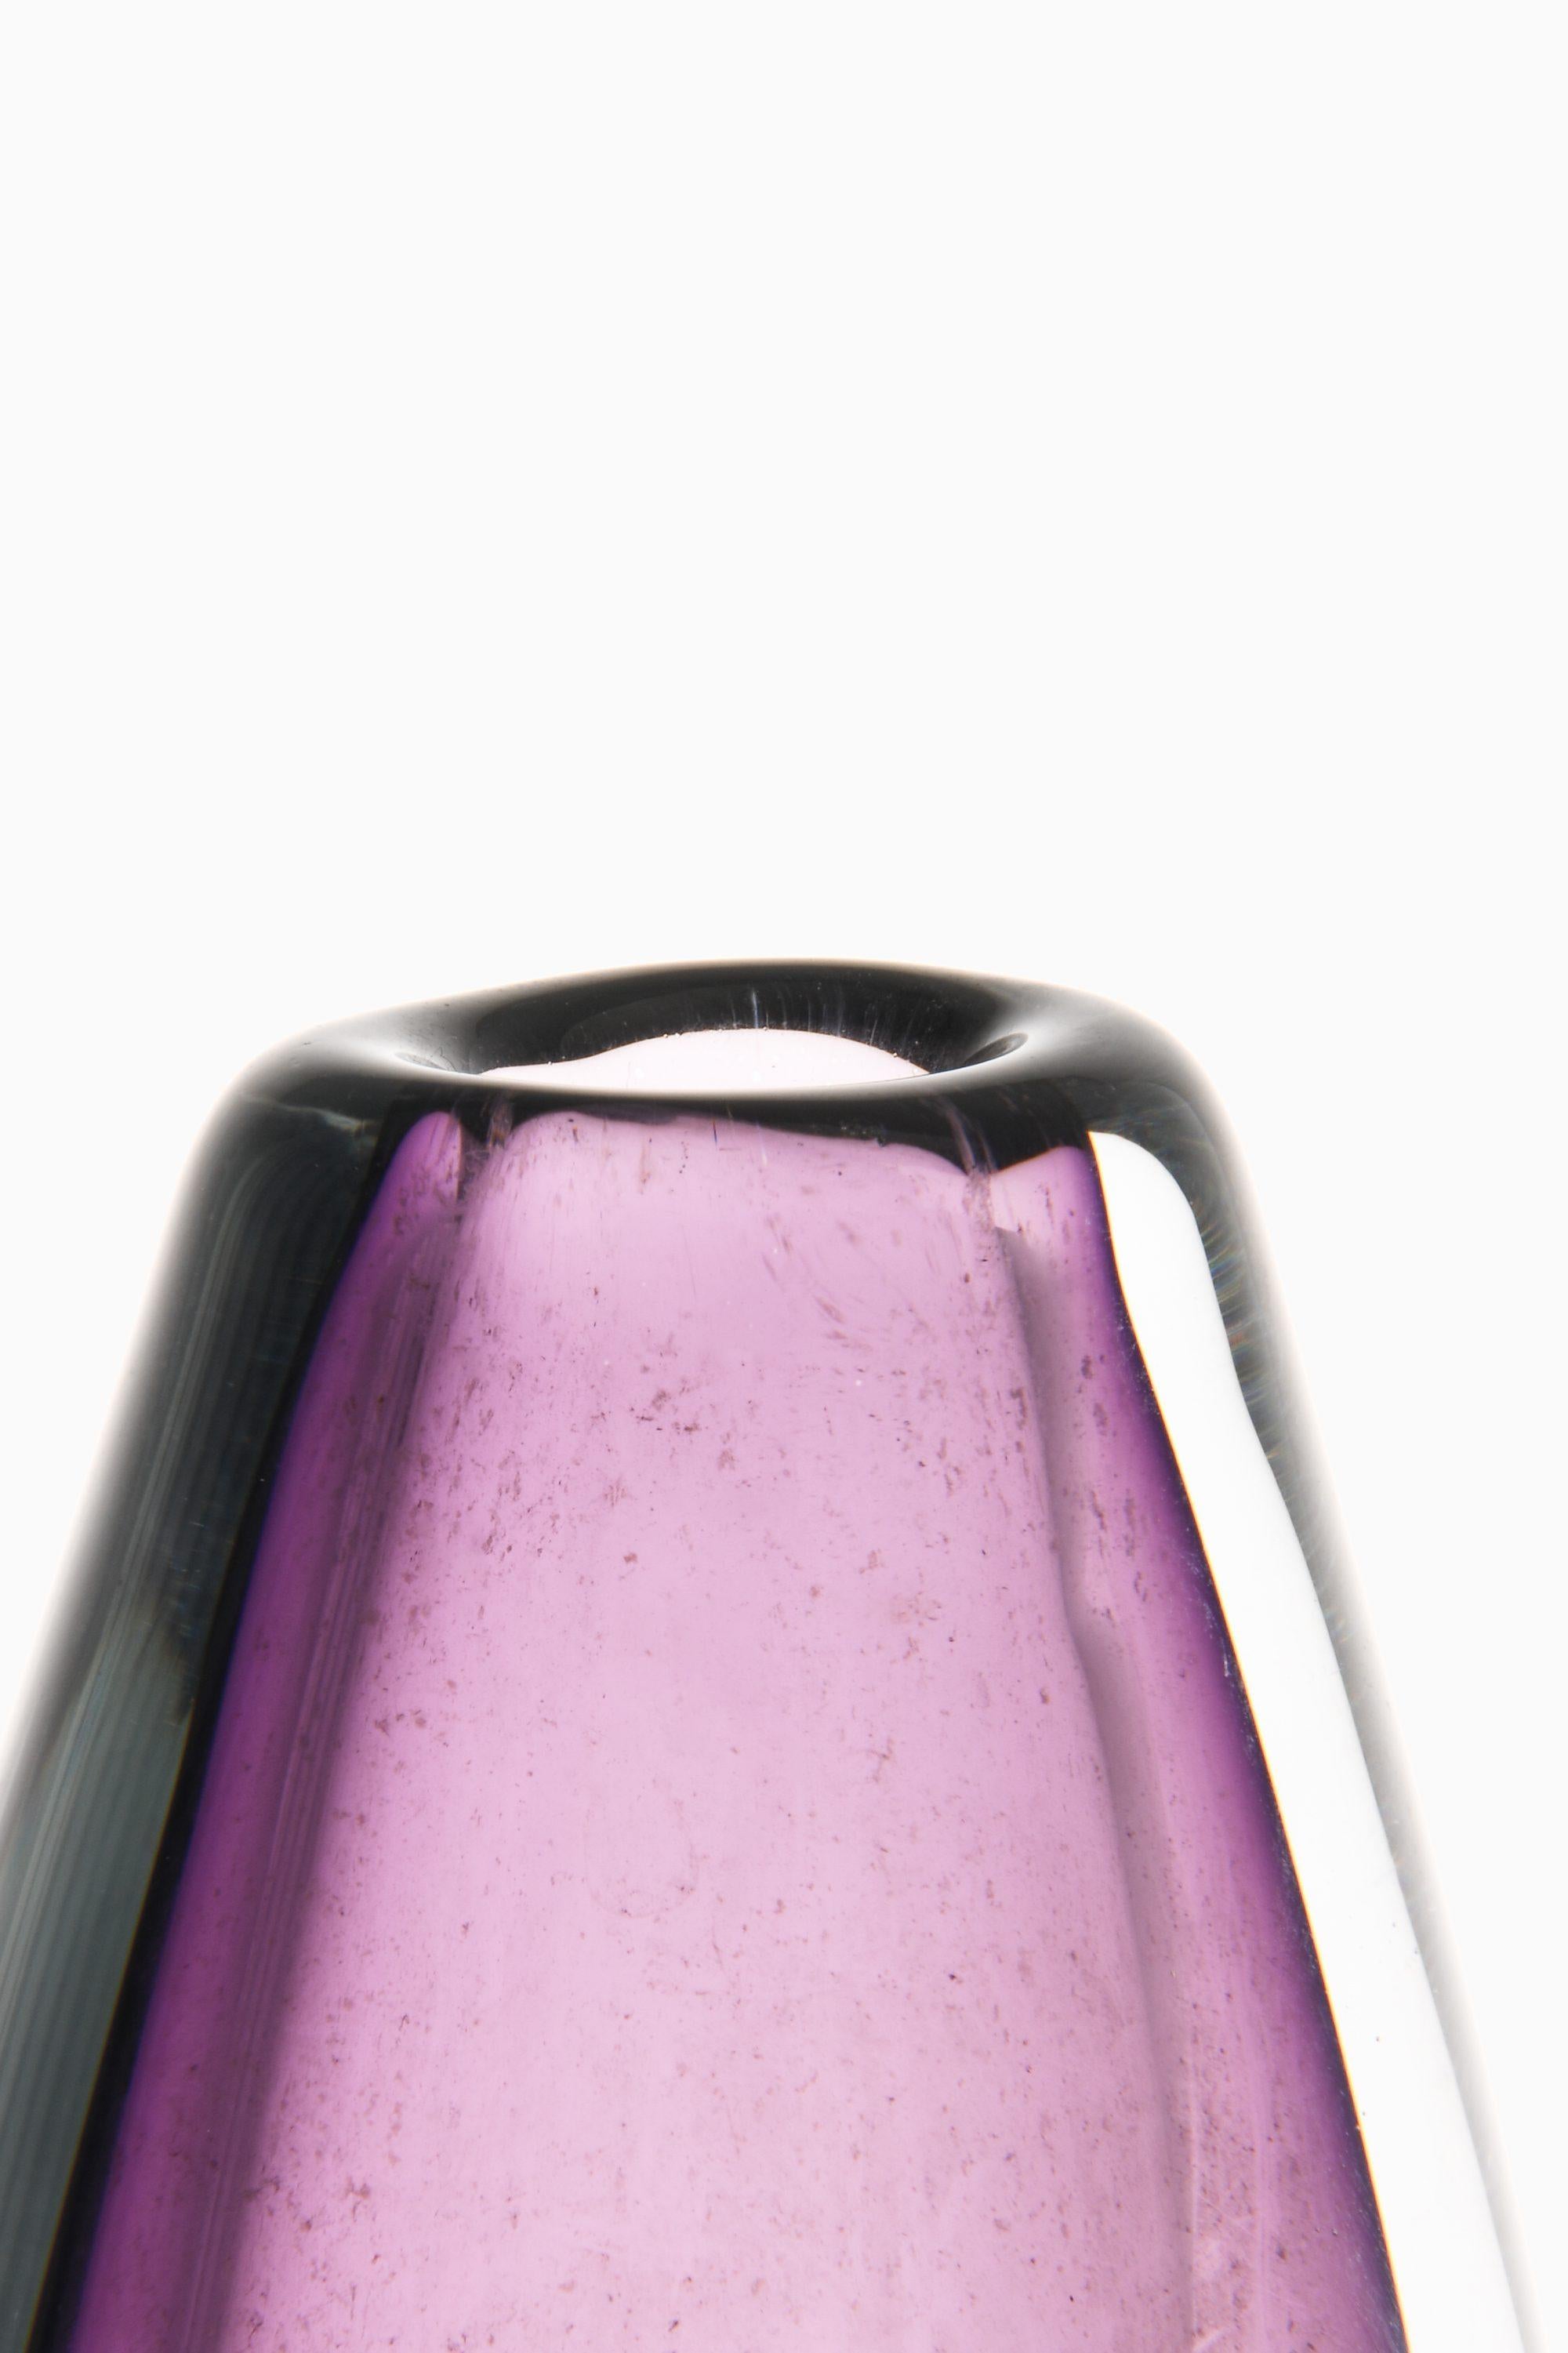 Glass Vase in Purple, 1950's

Additional Information:
Material: Glass
Style: Mid century, Scandinavian
Probably produced by Strömbergshyttan in Sweden
Dimensions (W x D x H): 10 x 6 x 21.5 cm
Condition: Good vintage condition, with small signs of